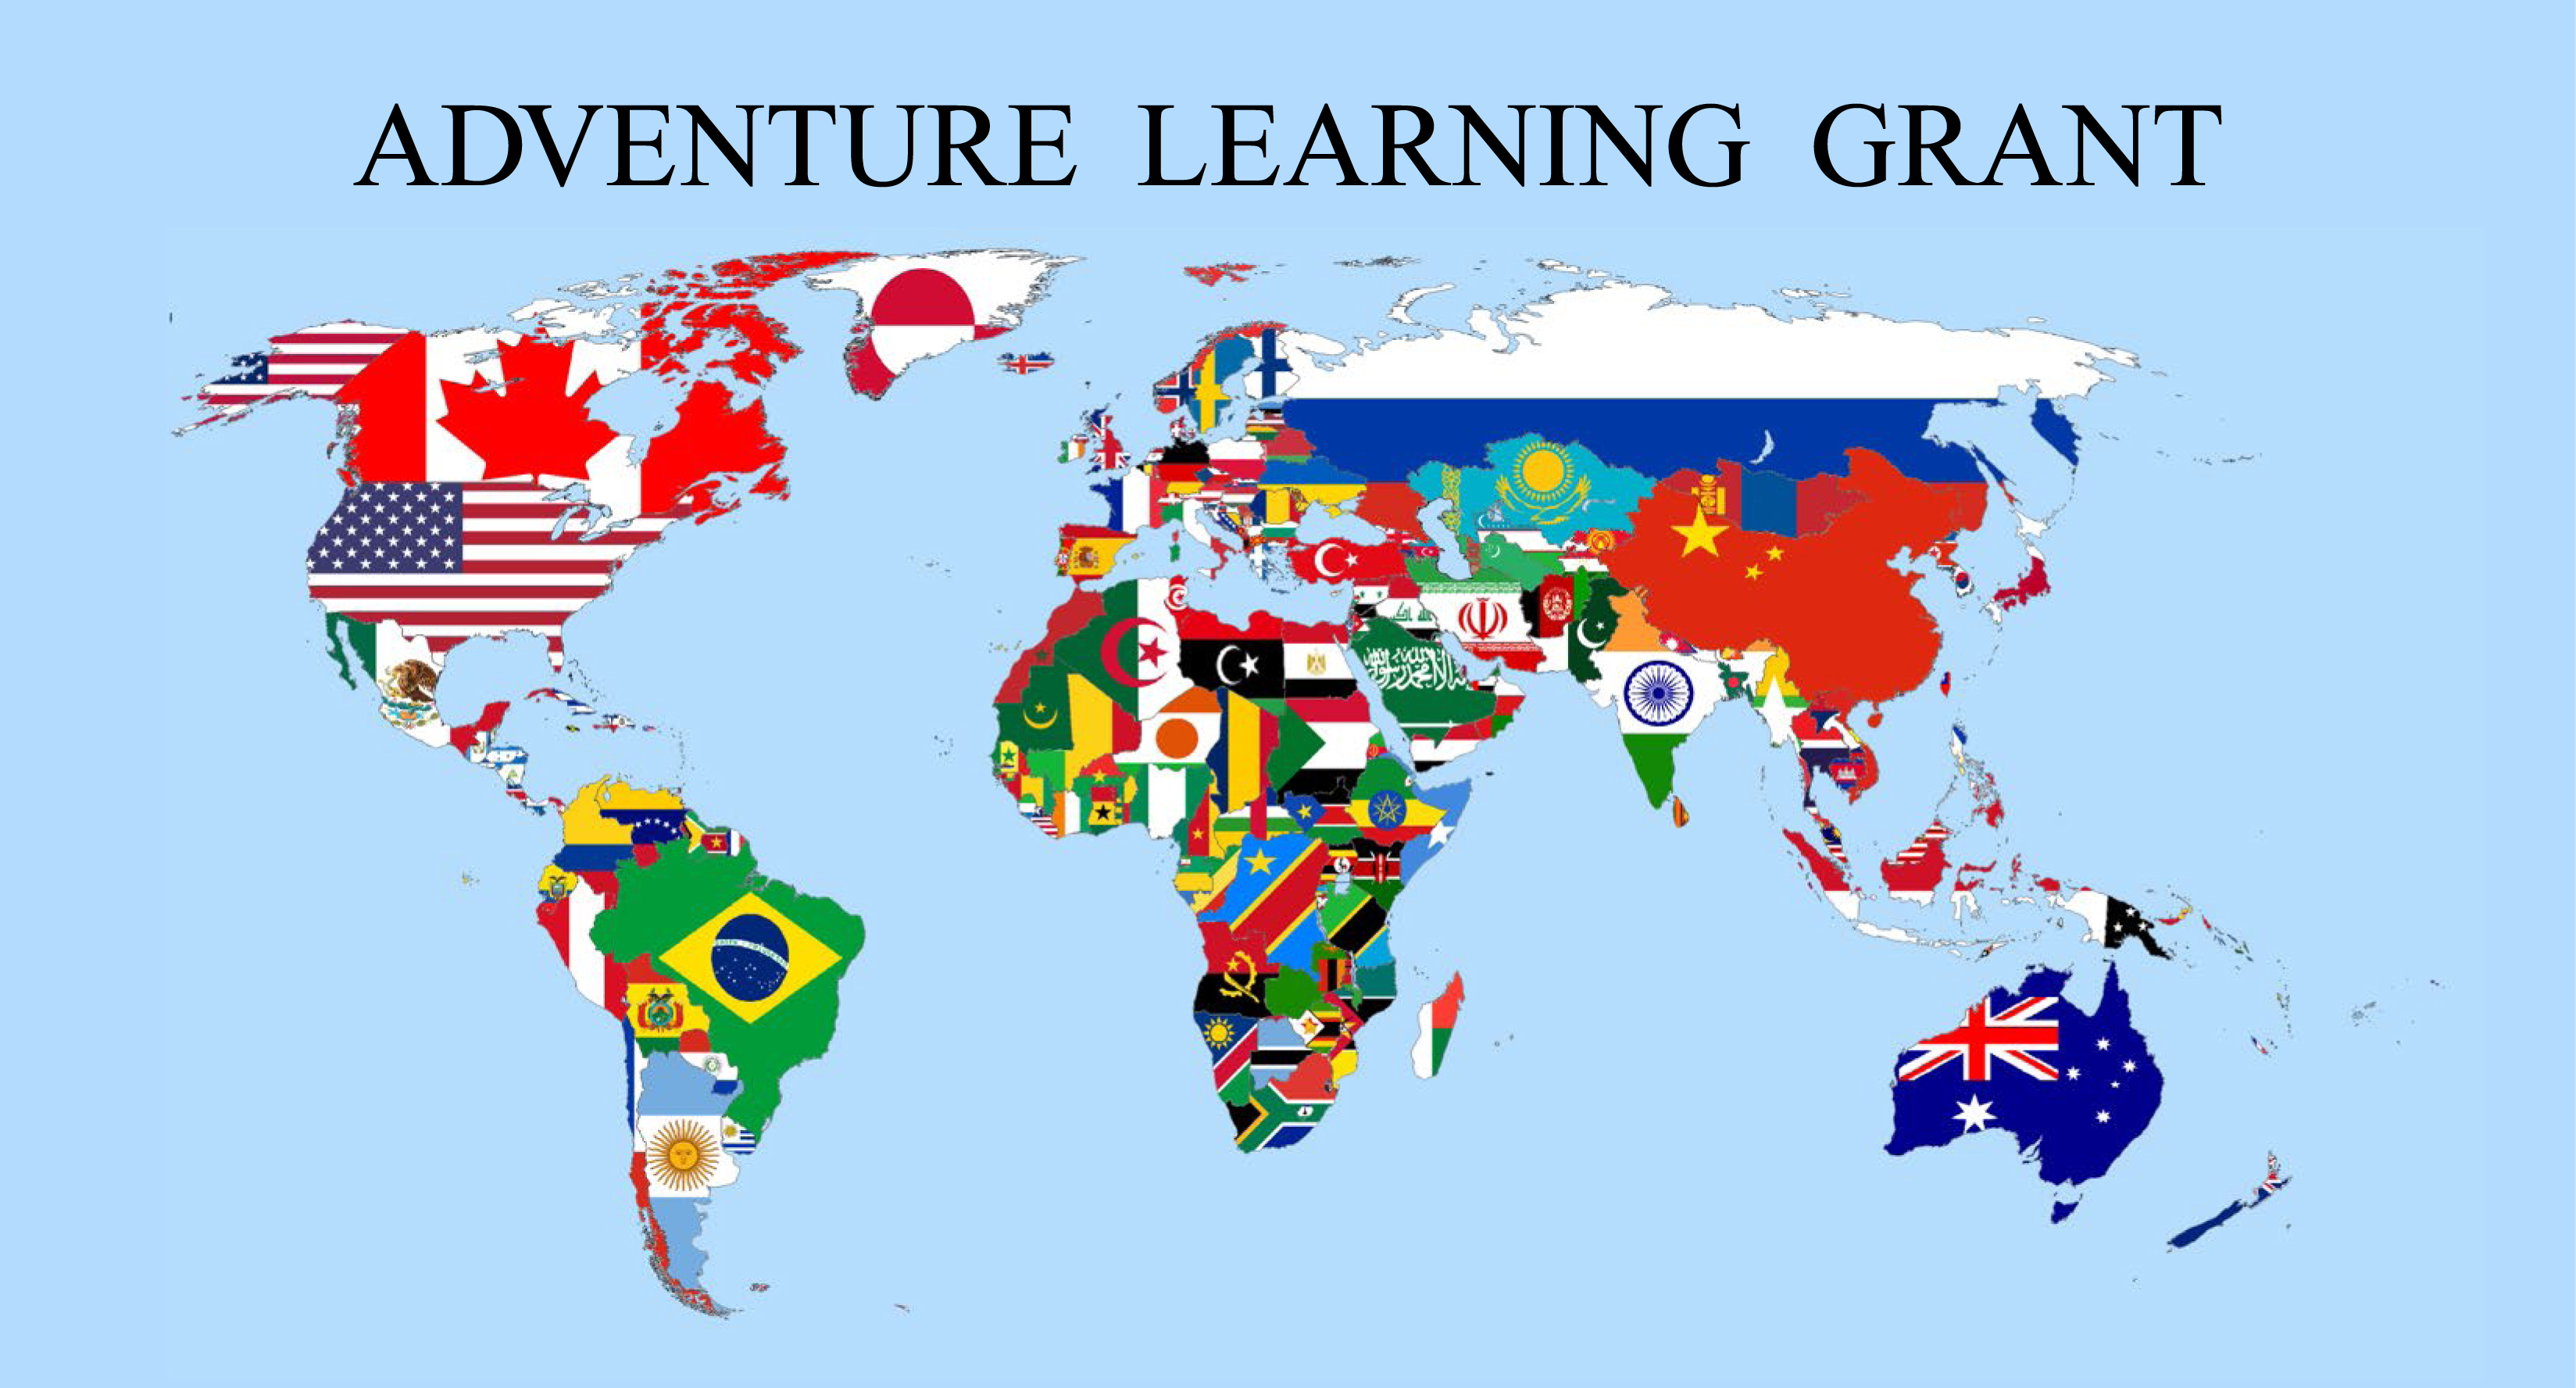 Adventure Learning Grant map